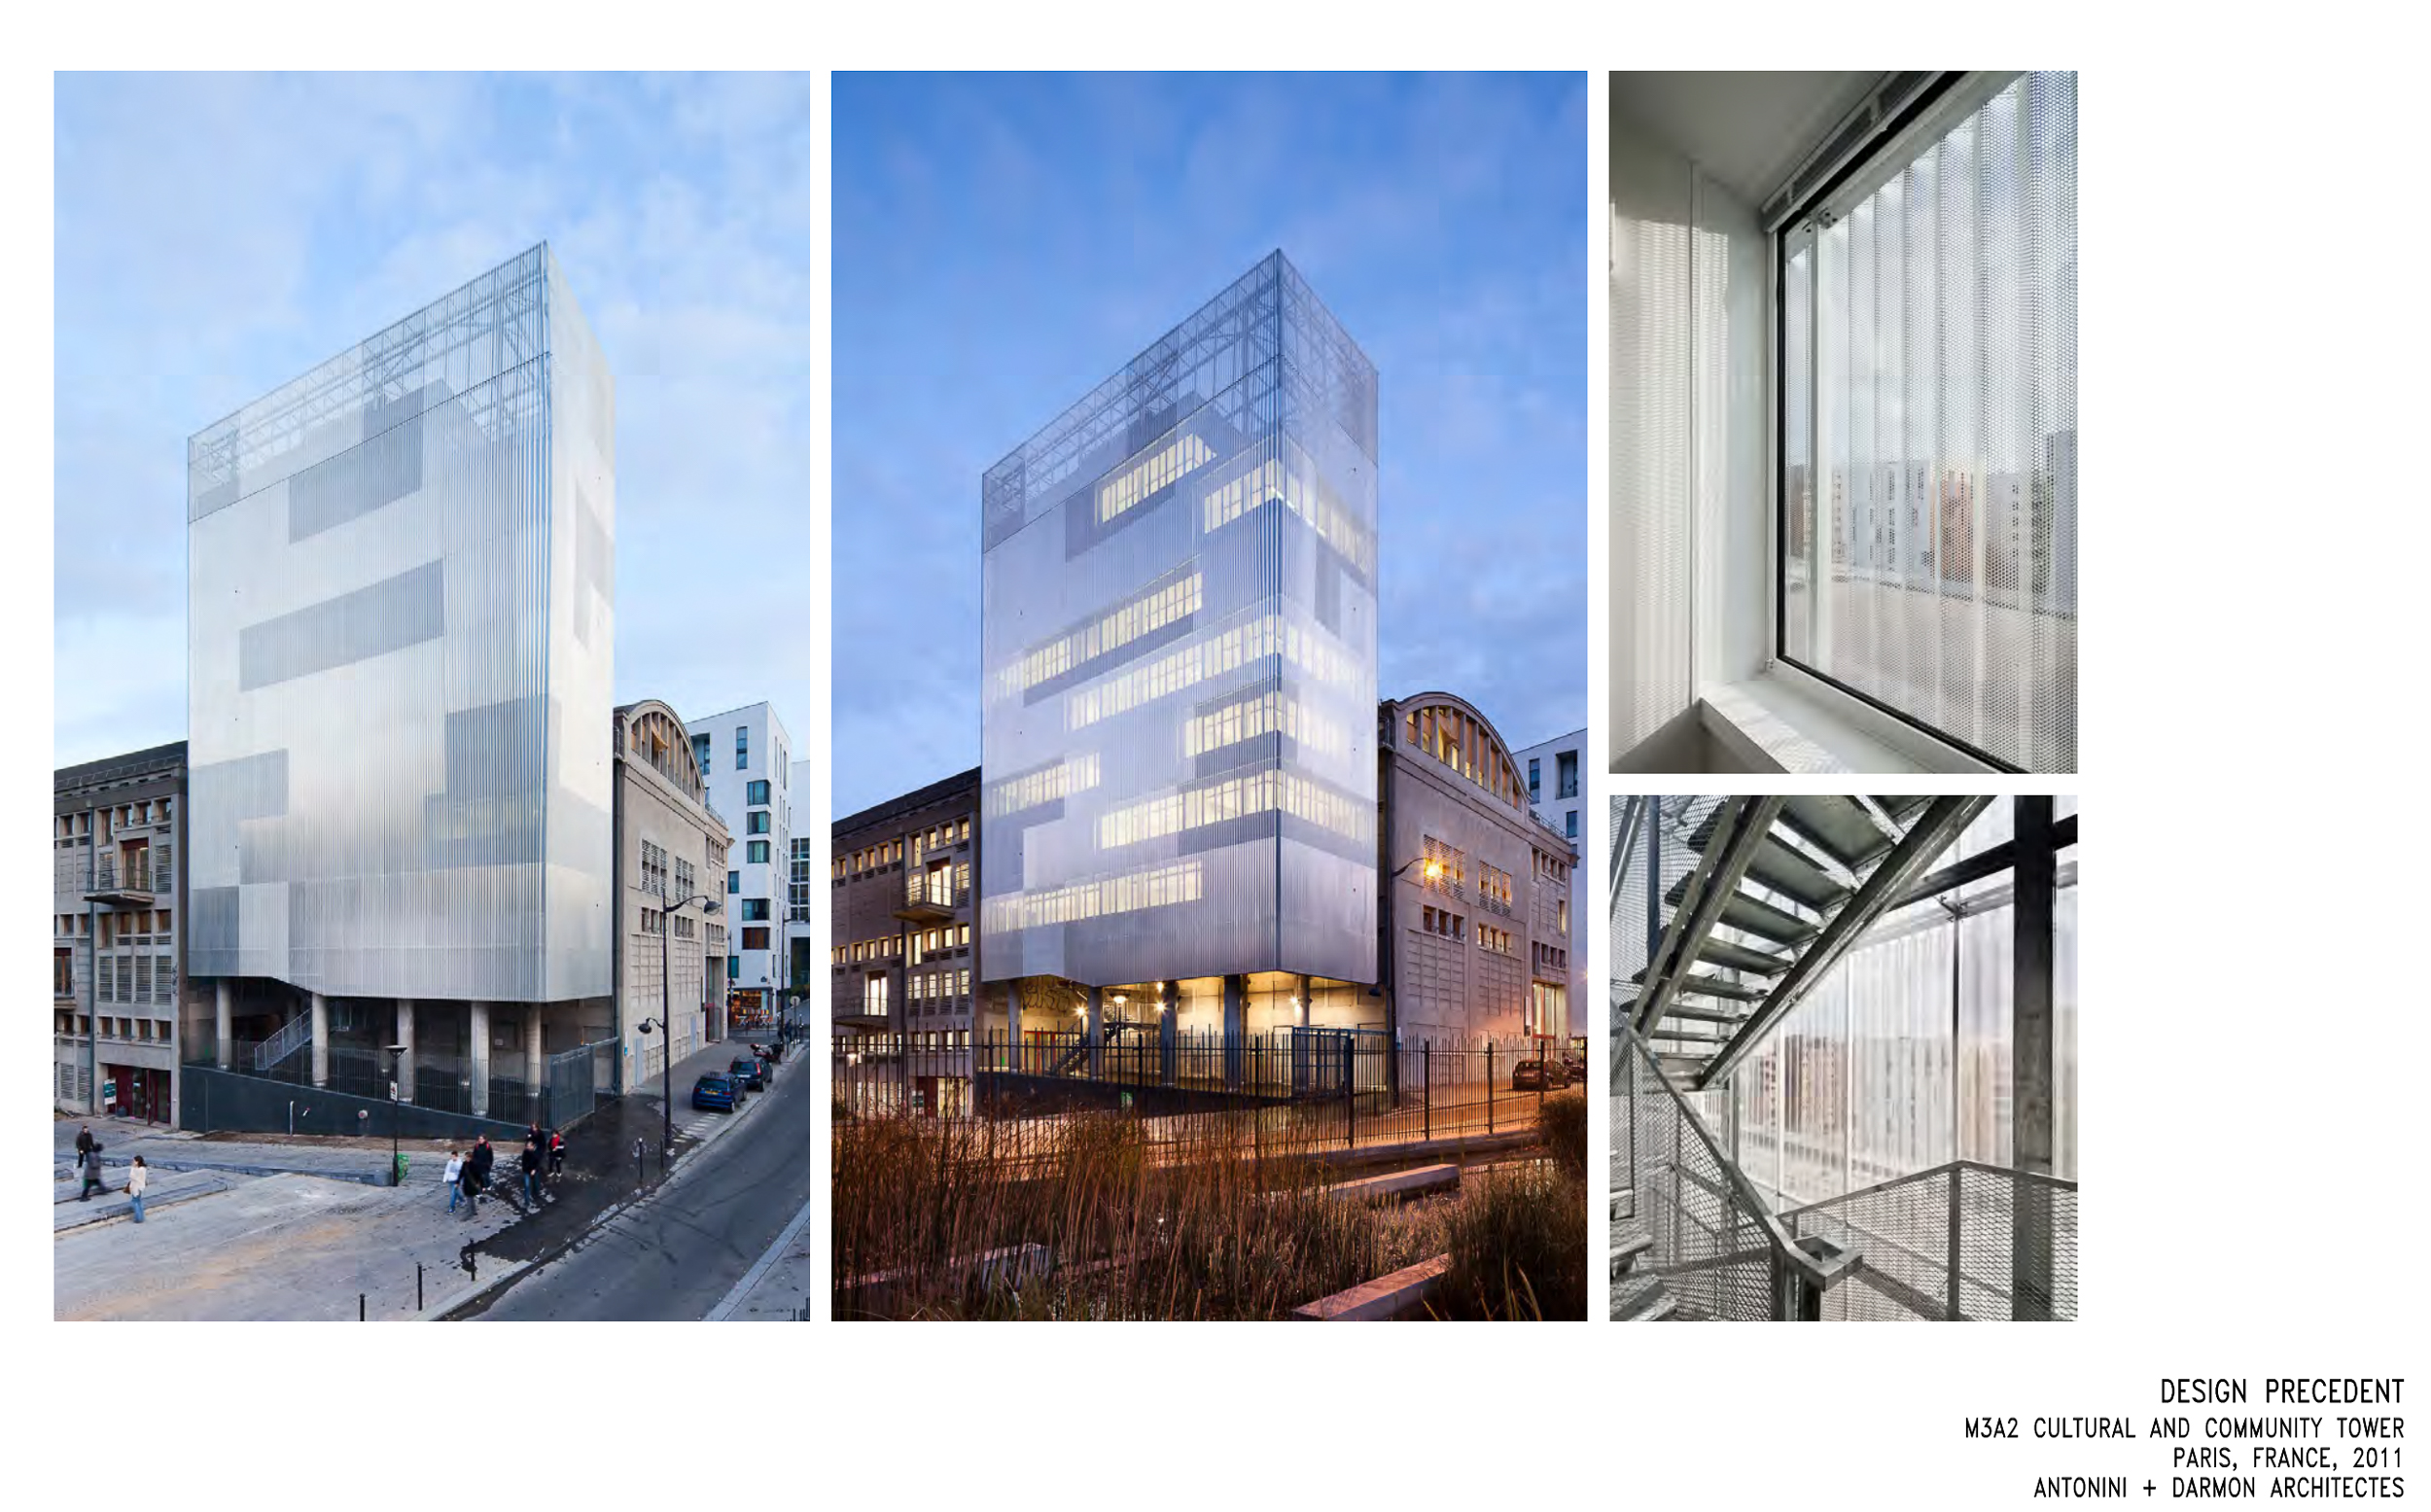 744 Harrison Street design inspiration, the M3A2 Cultural and Community Tower in Paris, France designed by Antonini + Darmon Architectes and built in 2011